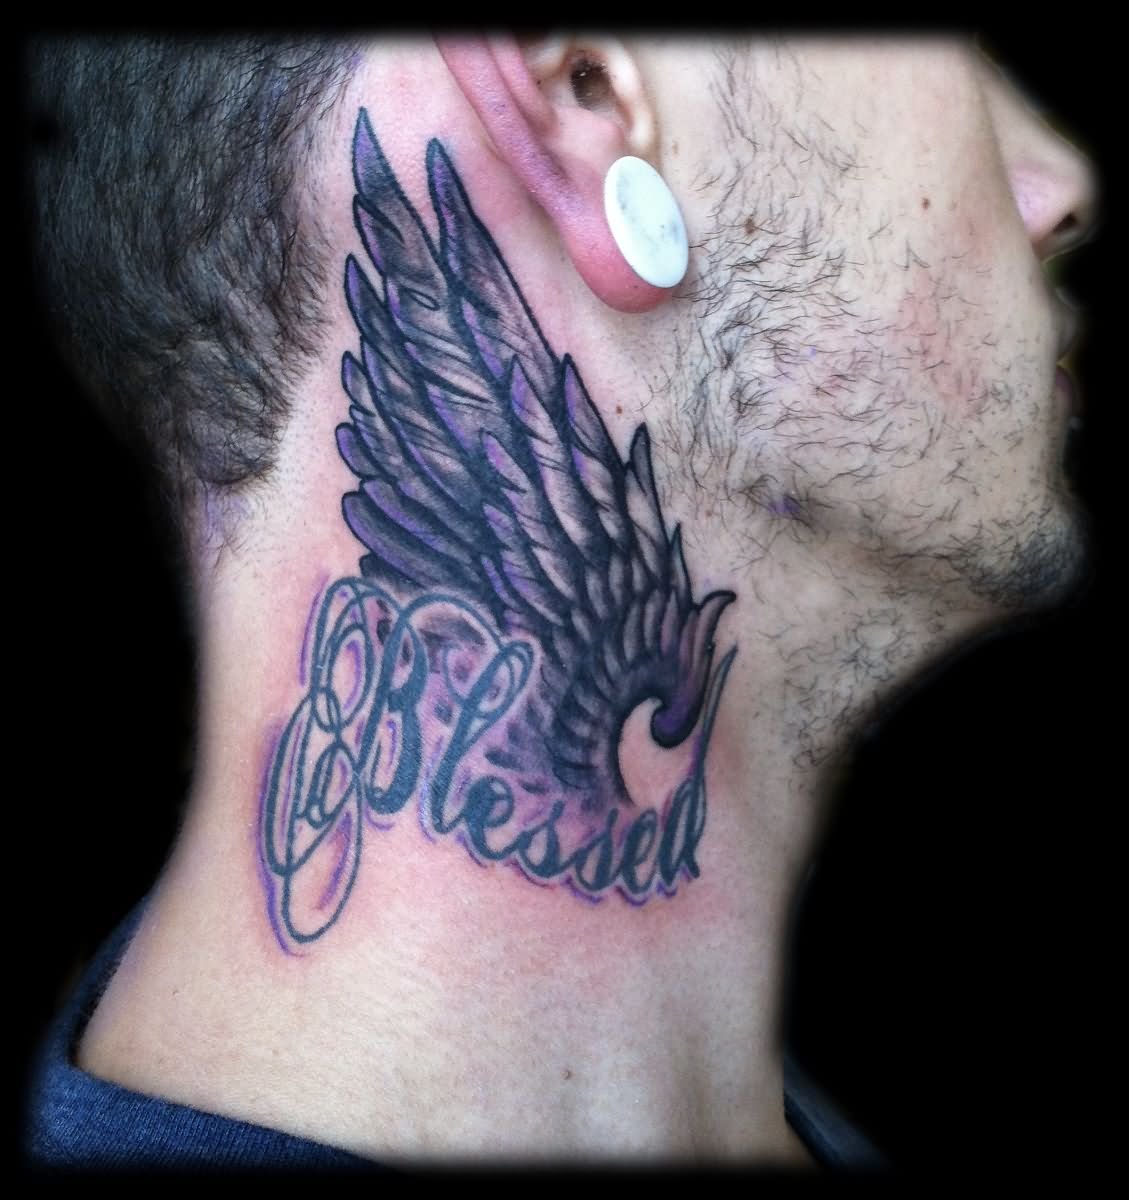 Blessed - Black Ink Wing Tattoo On Man Side Neck